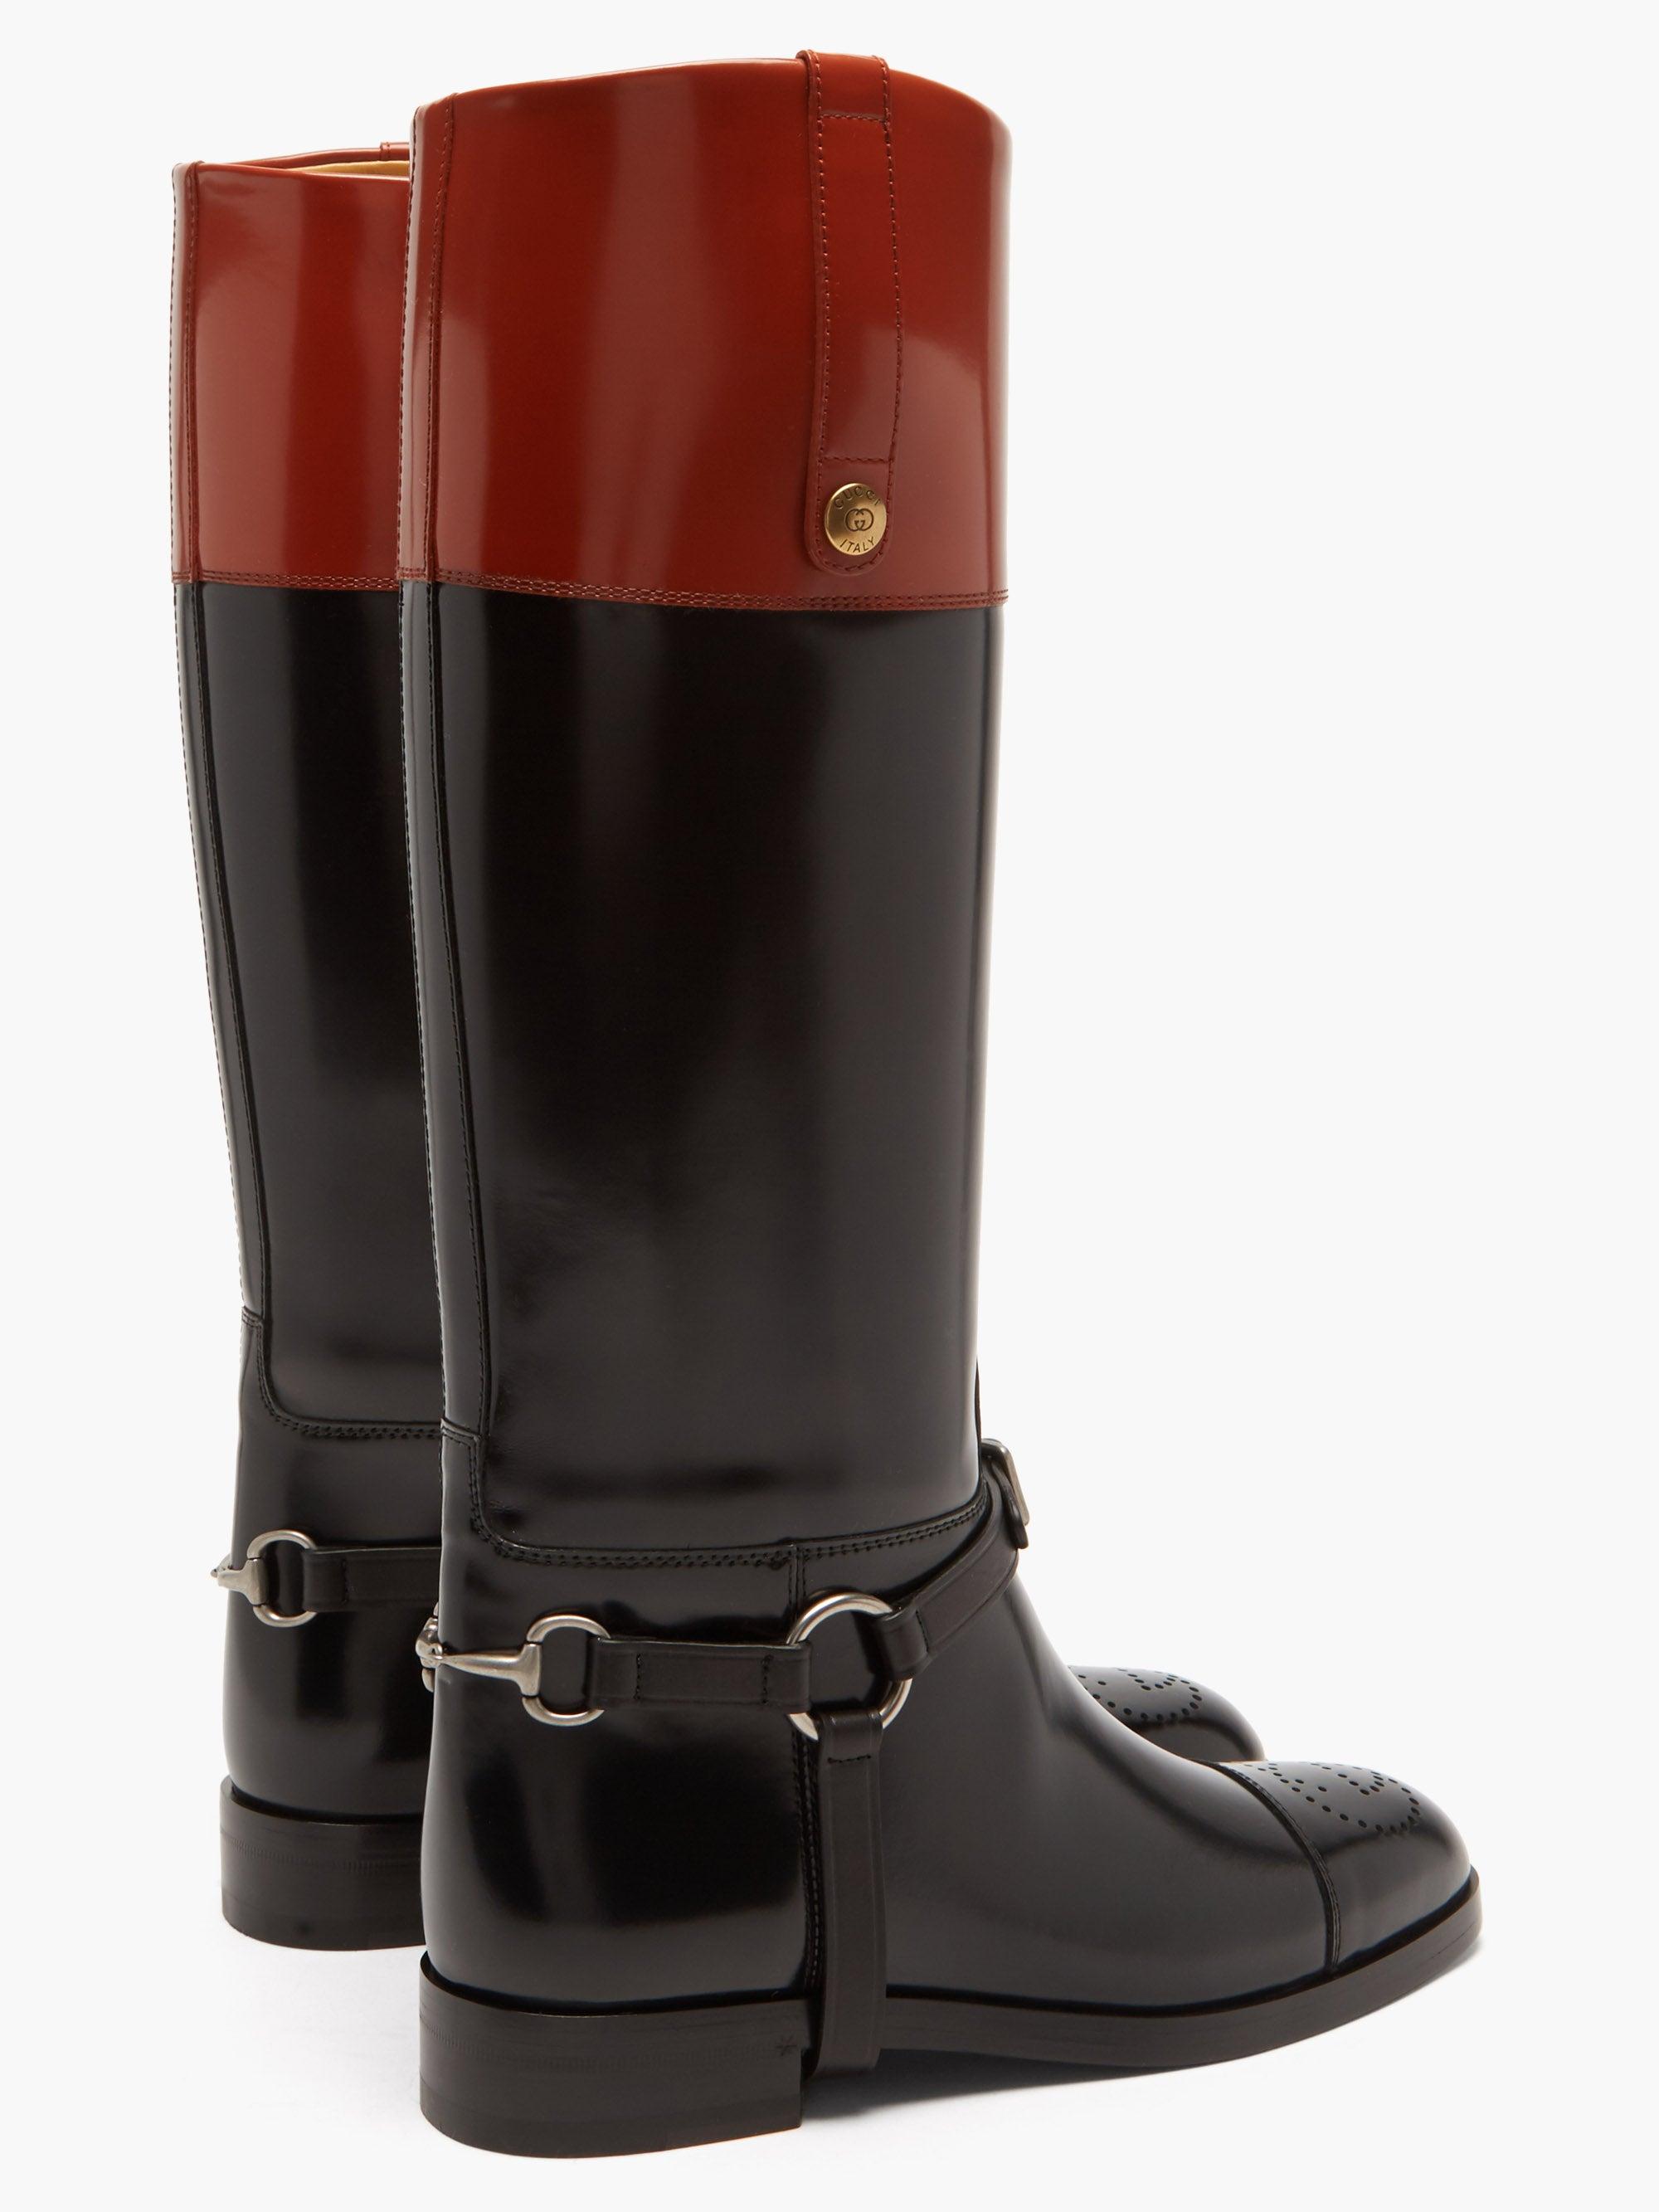 Gucci Zelda Harness-embellished Leather Knee-high Boots in Black | Lyst